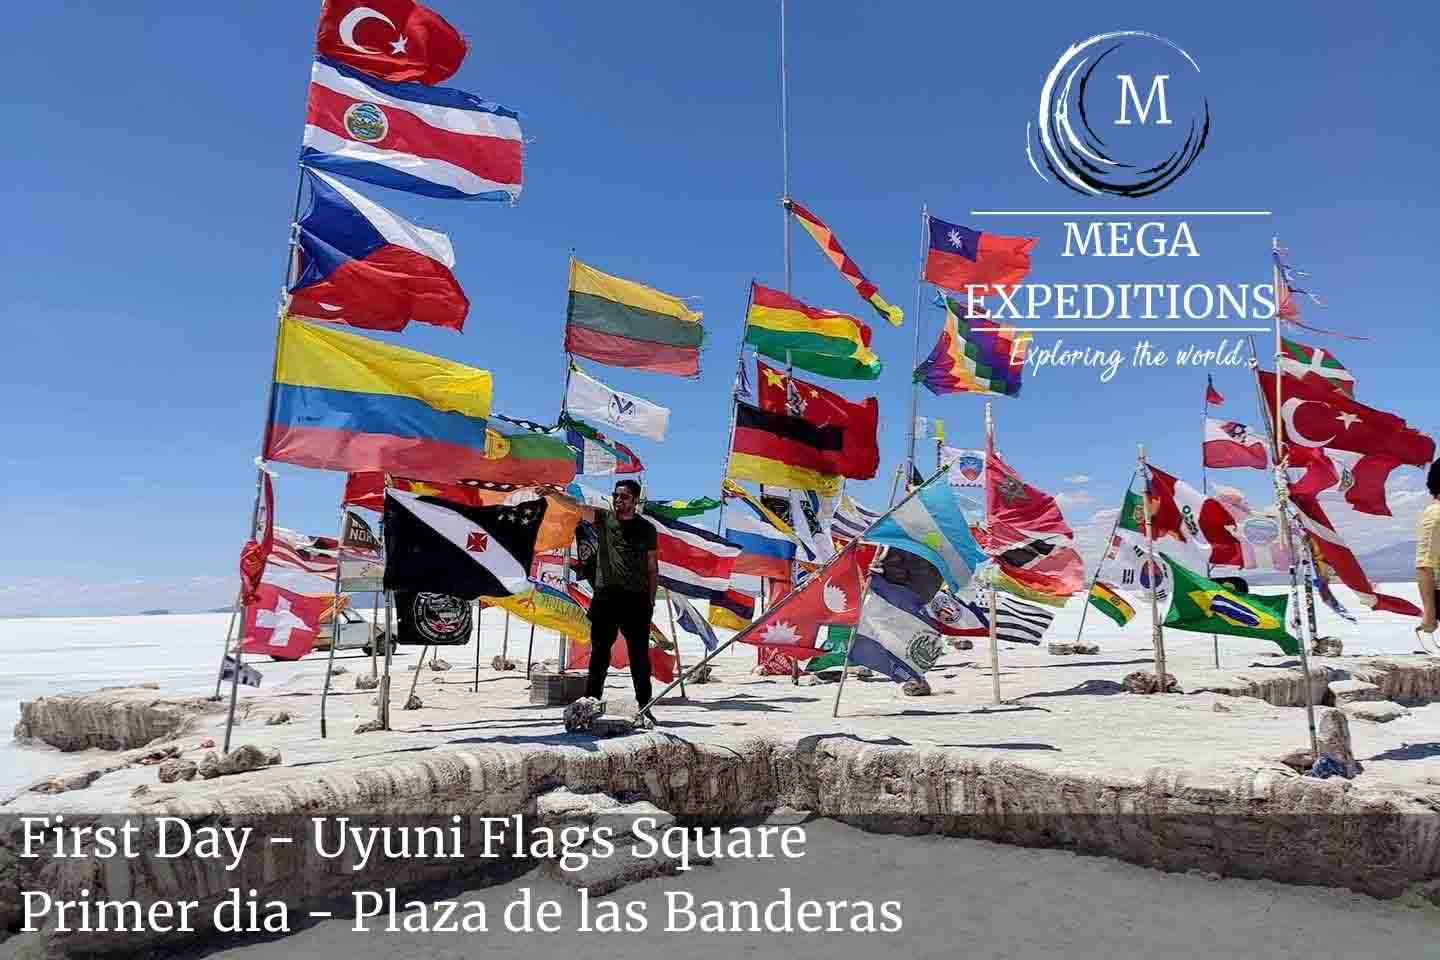 First Day - Uyuni Flags Square in the Salt Flat of Bolivia